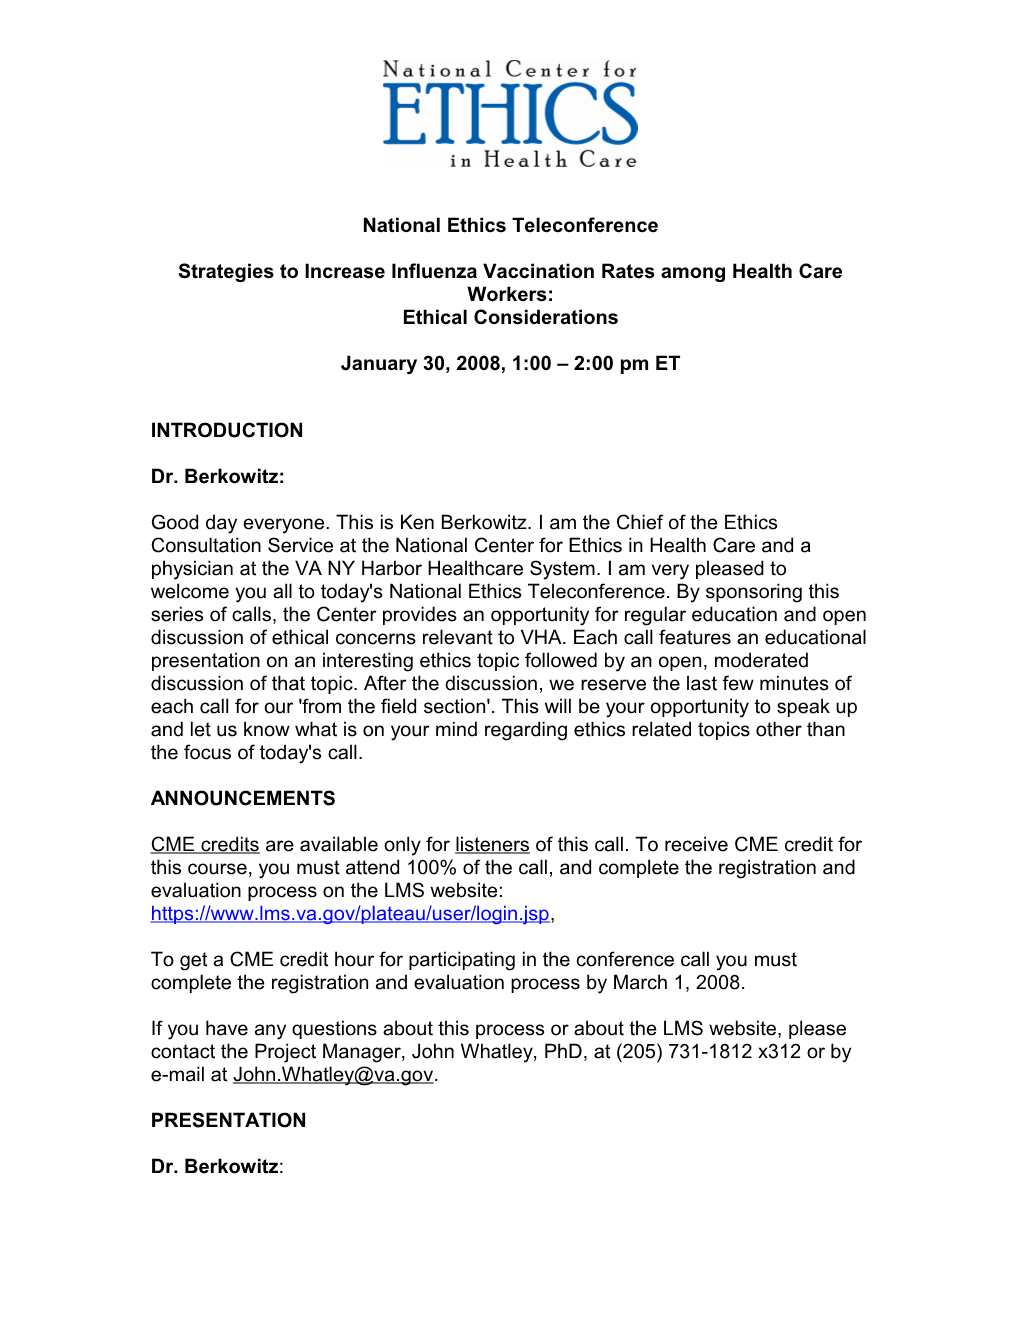 National Ethics Teleconference - Increasing Influenza Vaccination Rates Among Health Care